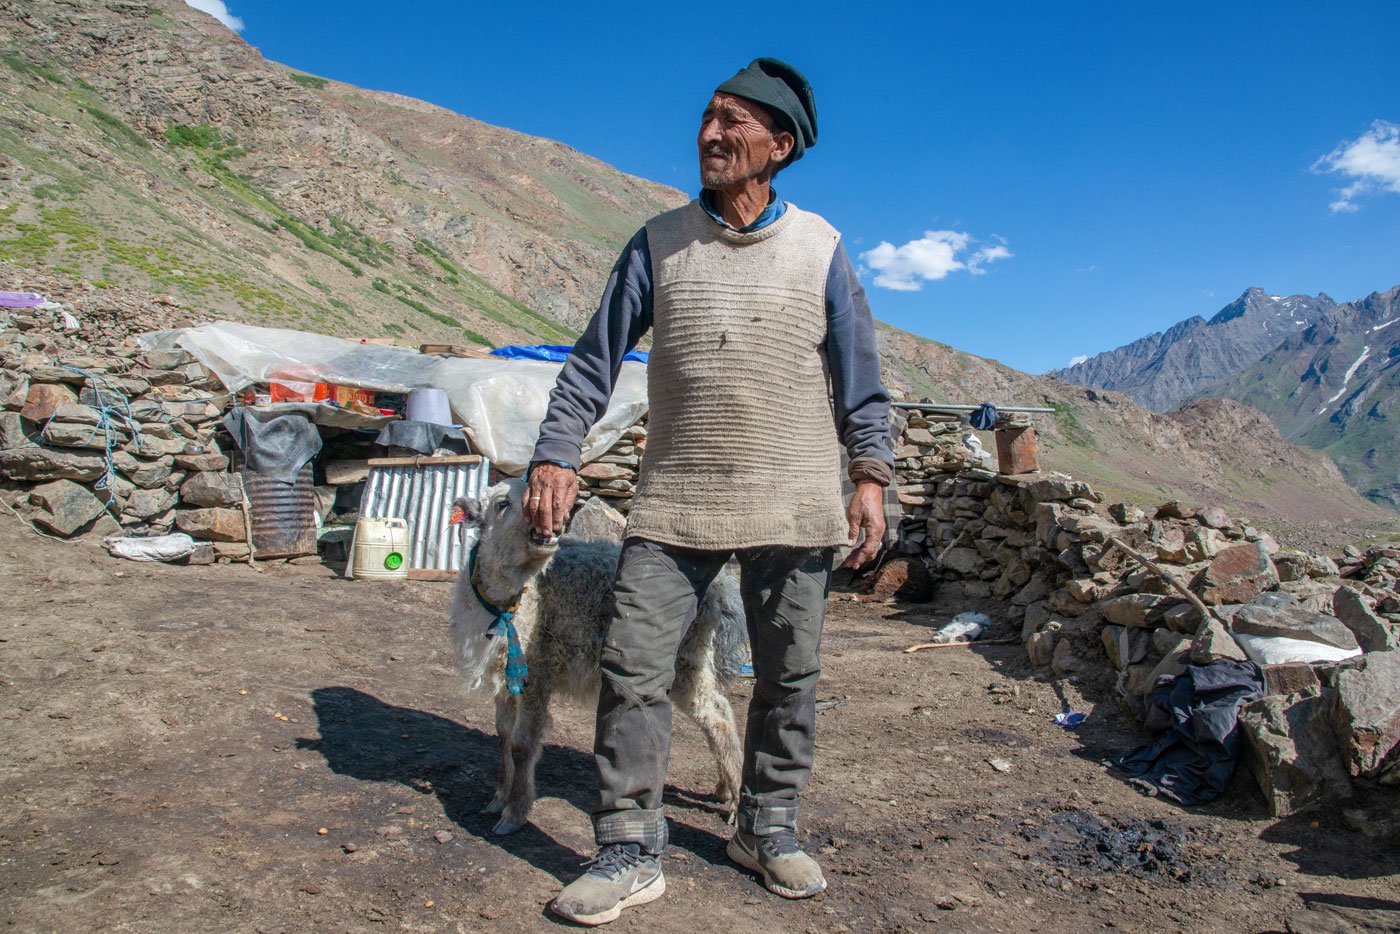 The 69-year-old Sonam Motup from Abran village has been tending to approximately 120 yaks for a few decades now